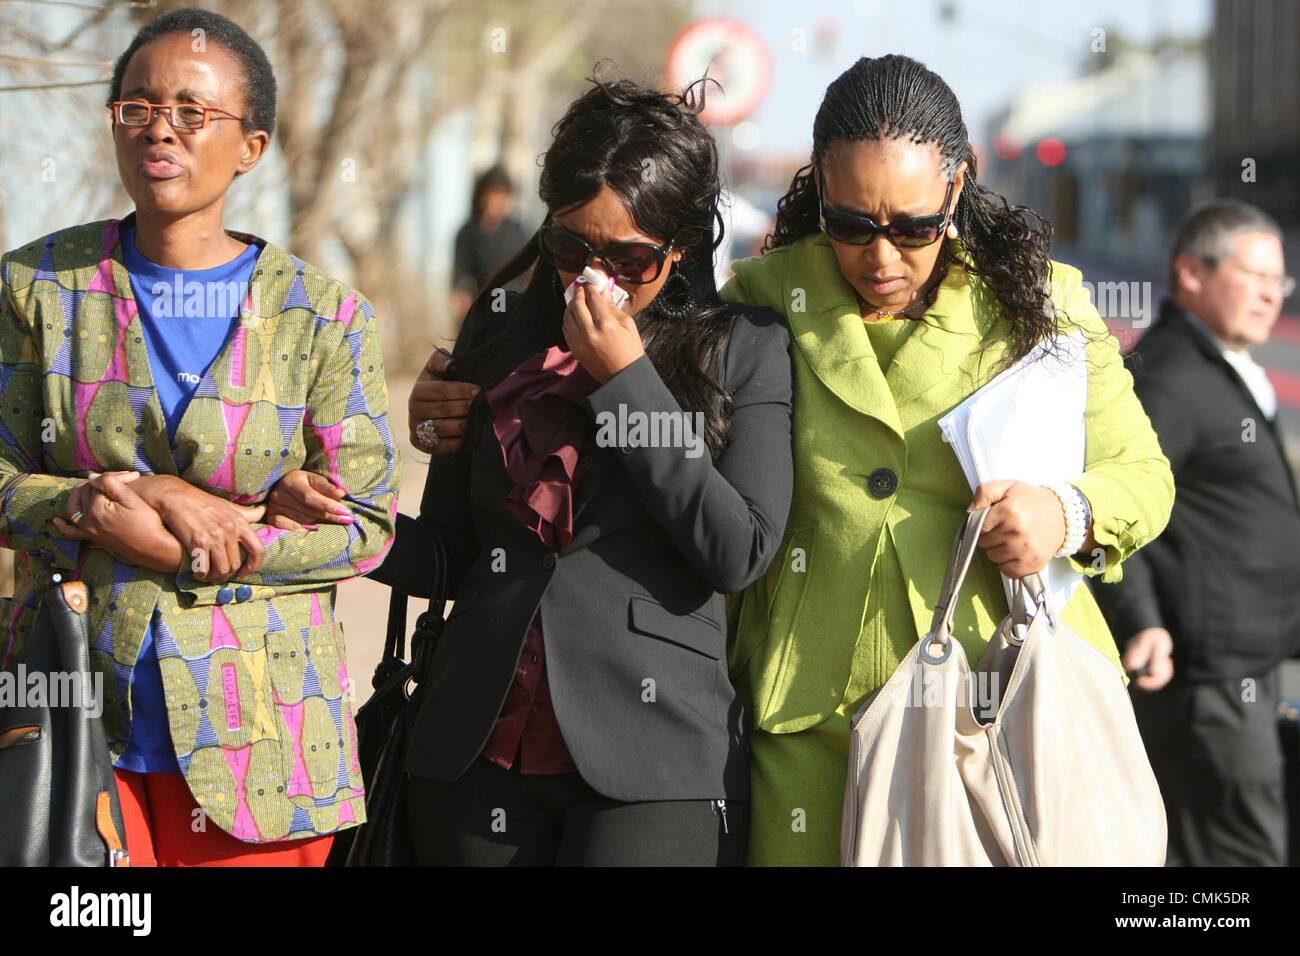 JOHANNESBURG, SOUTH AFRICA: Zenani Mandela (R) comforts her daughter Zoleka Mandela (C) outside the Johannesburg Magistrates Court on August 20, 2012 in Johannesburg, South Africa. They attended the trial of Sizwe Mankazana who is charged with murder, attempted murder and negligent driving after Nelson Mandela’s great-granddaughter Zenani Mandela was killed in a car crash. (Photo by Gallo Images / Sowetan / Mabuti Kali) Stock Photo